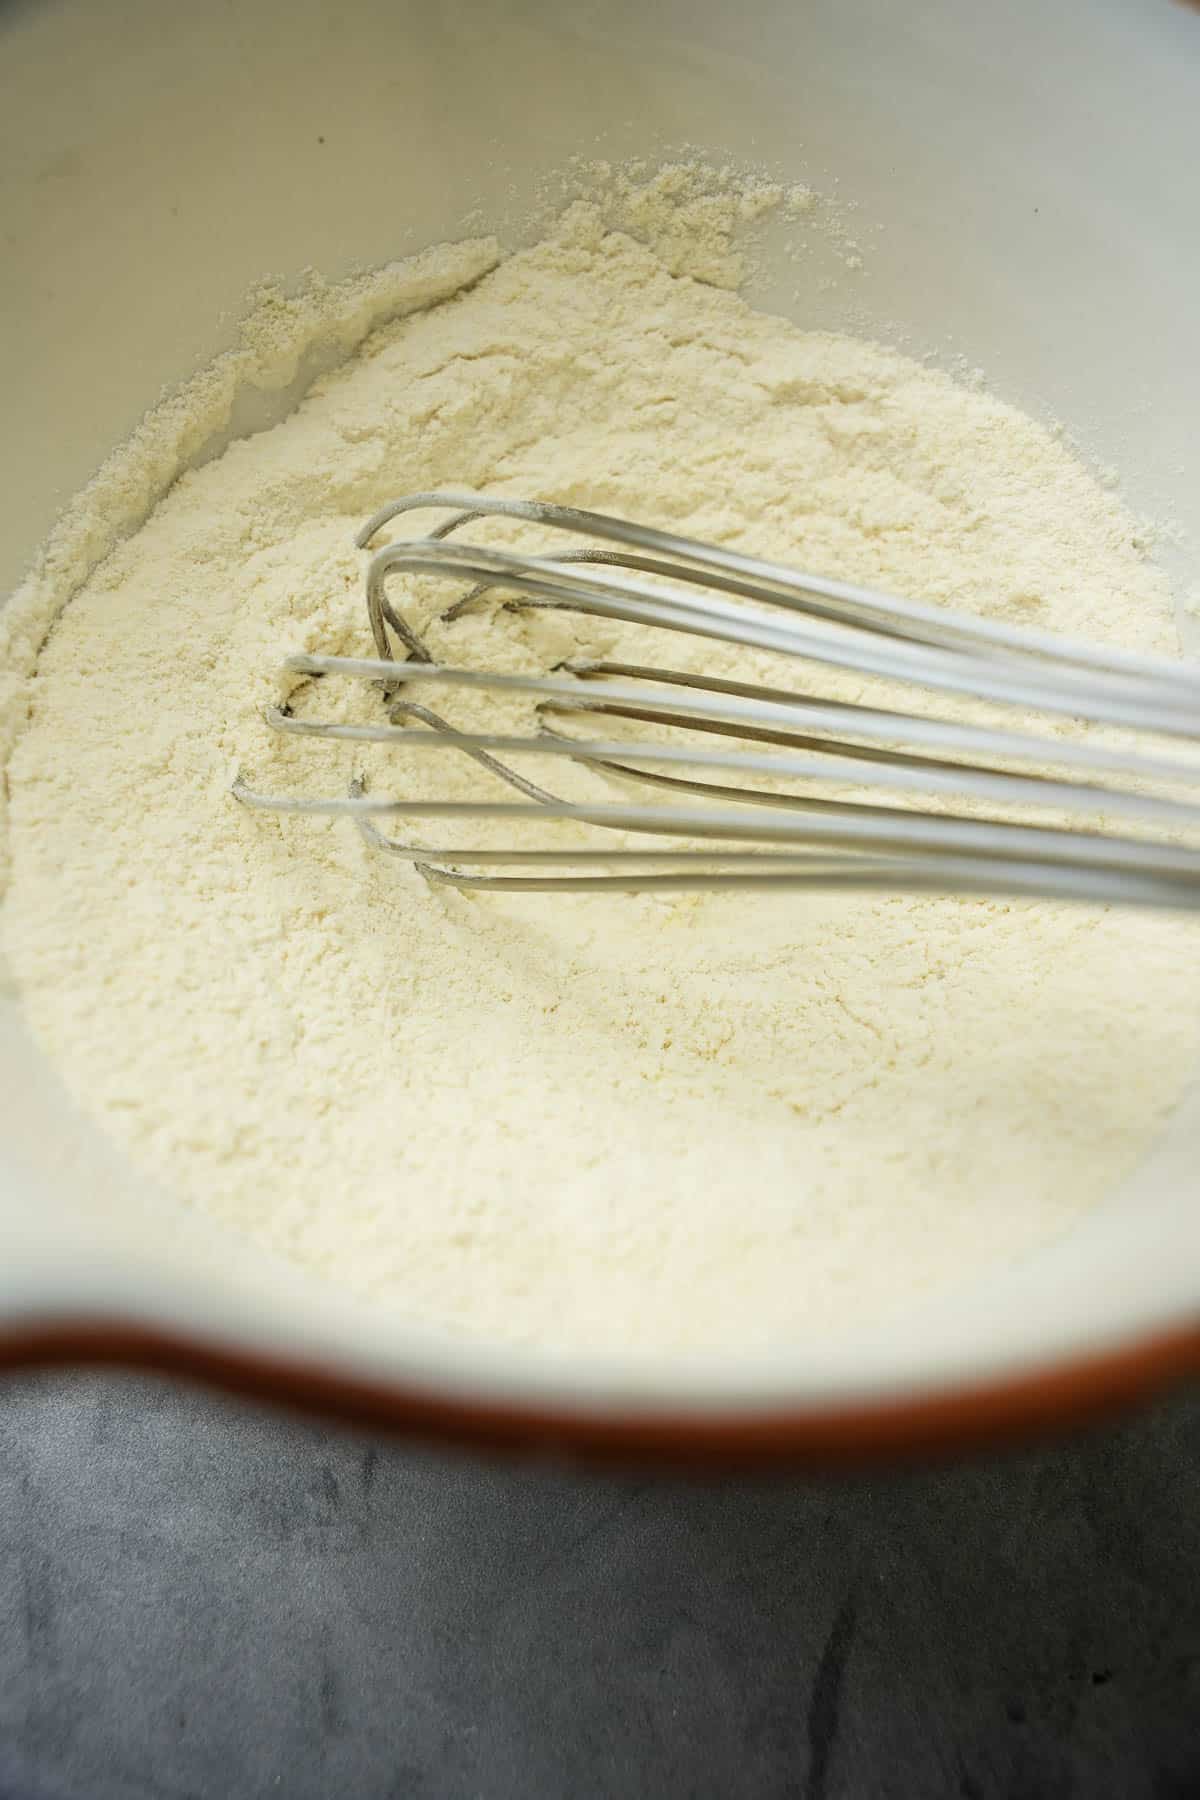 The dry ingredients are whisked together in a white ceramic mixing bowl.